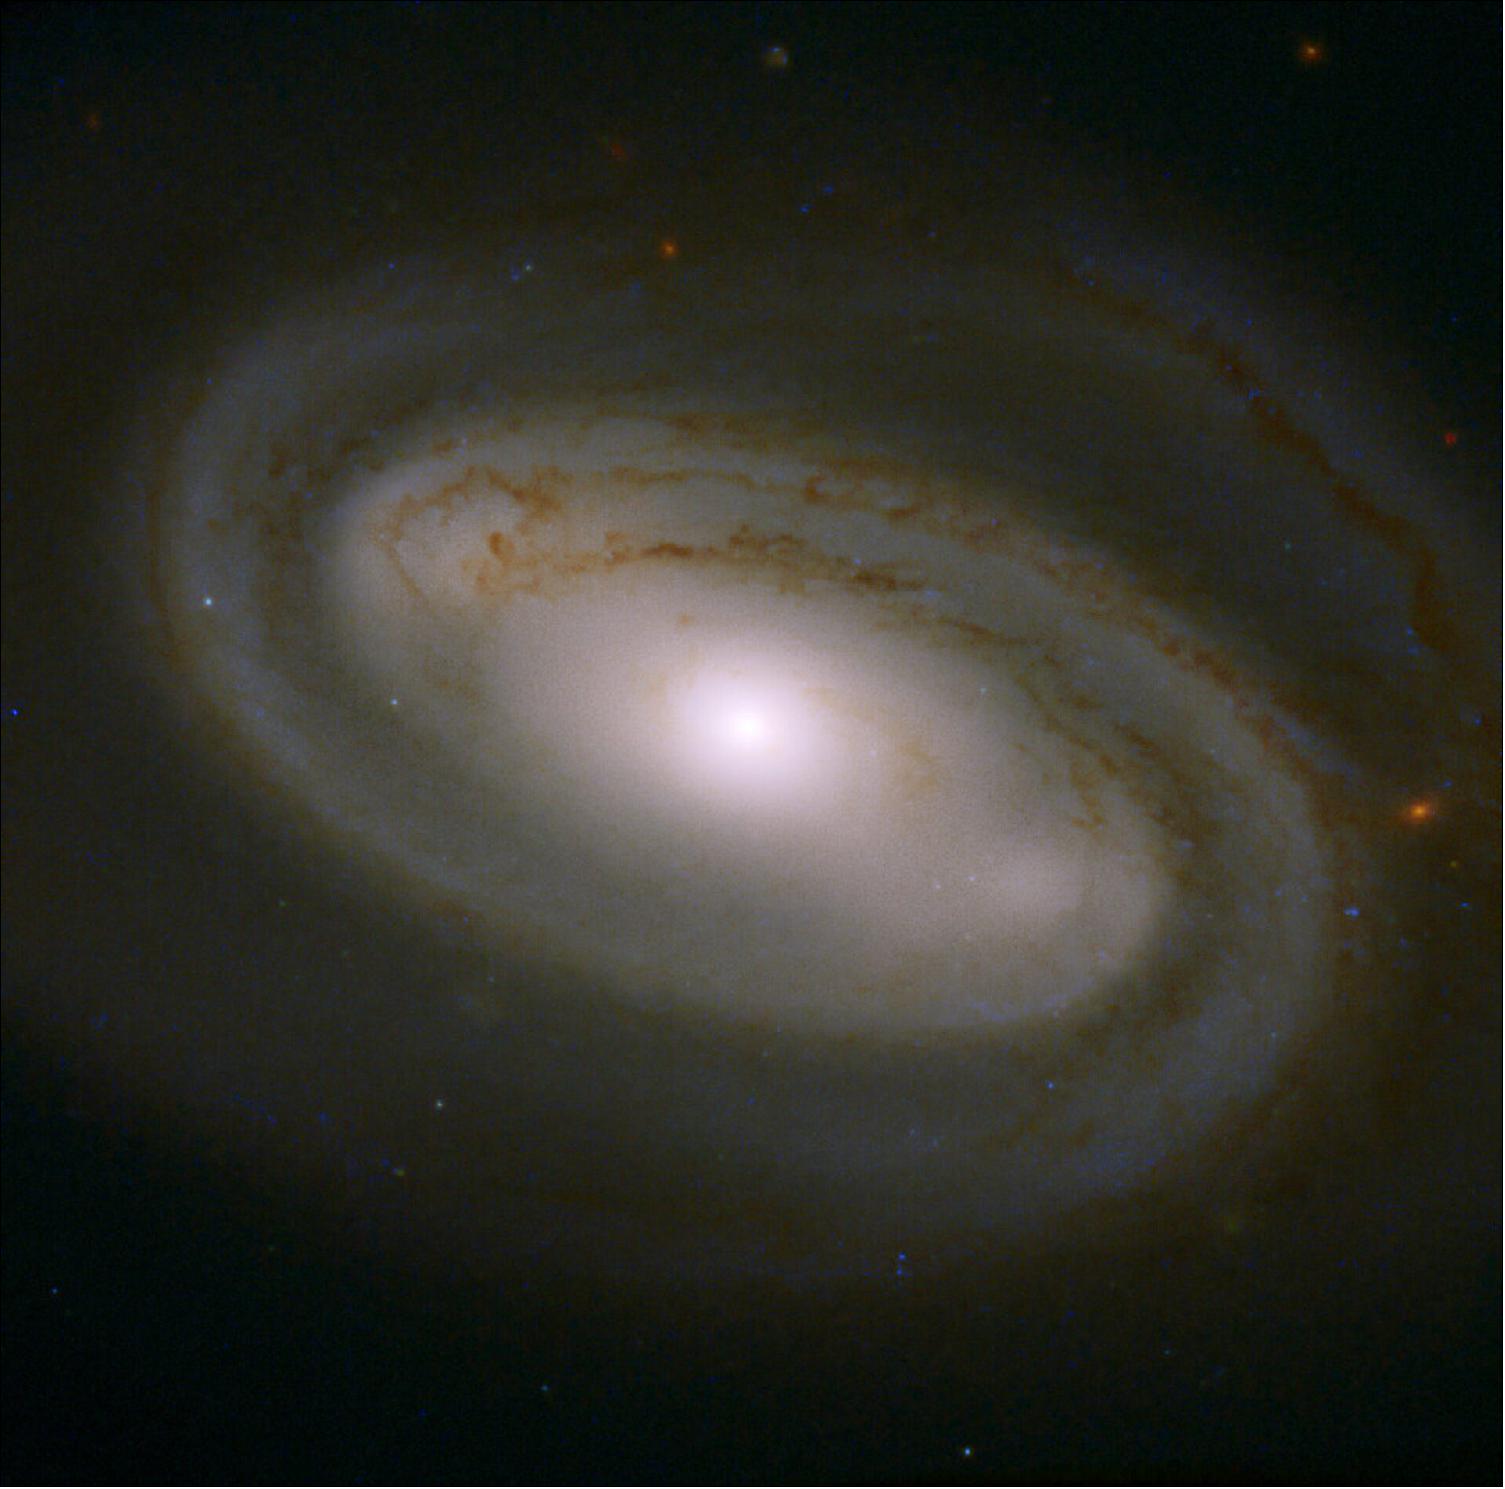 Figure 57: Hubble's orbit high above the Earth's distorting atmosphere allows astronomers to make the very high resolution observations that are essential to opening new windows on planets, stars and galaxies — such as this beautiful view of NGC 3895. The telescope is positioned approximately 570 km above the ground, where it whirls around Earth at 28,000 km/hr and takes 96 minutes to complete one orbit (image credit: ESA/Hubble, NASA, and R. Barrows; CC BY 4.0)